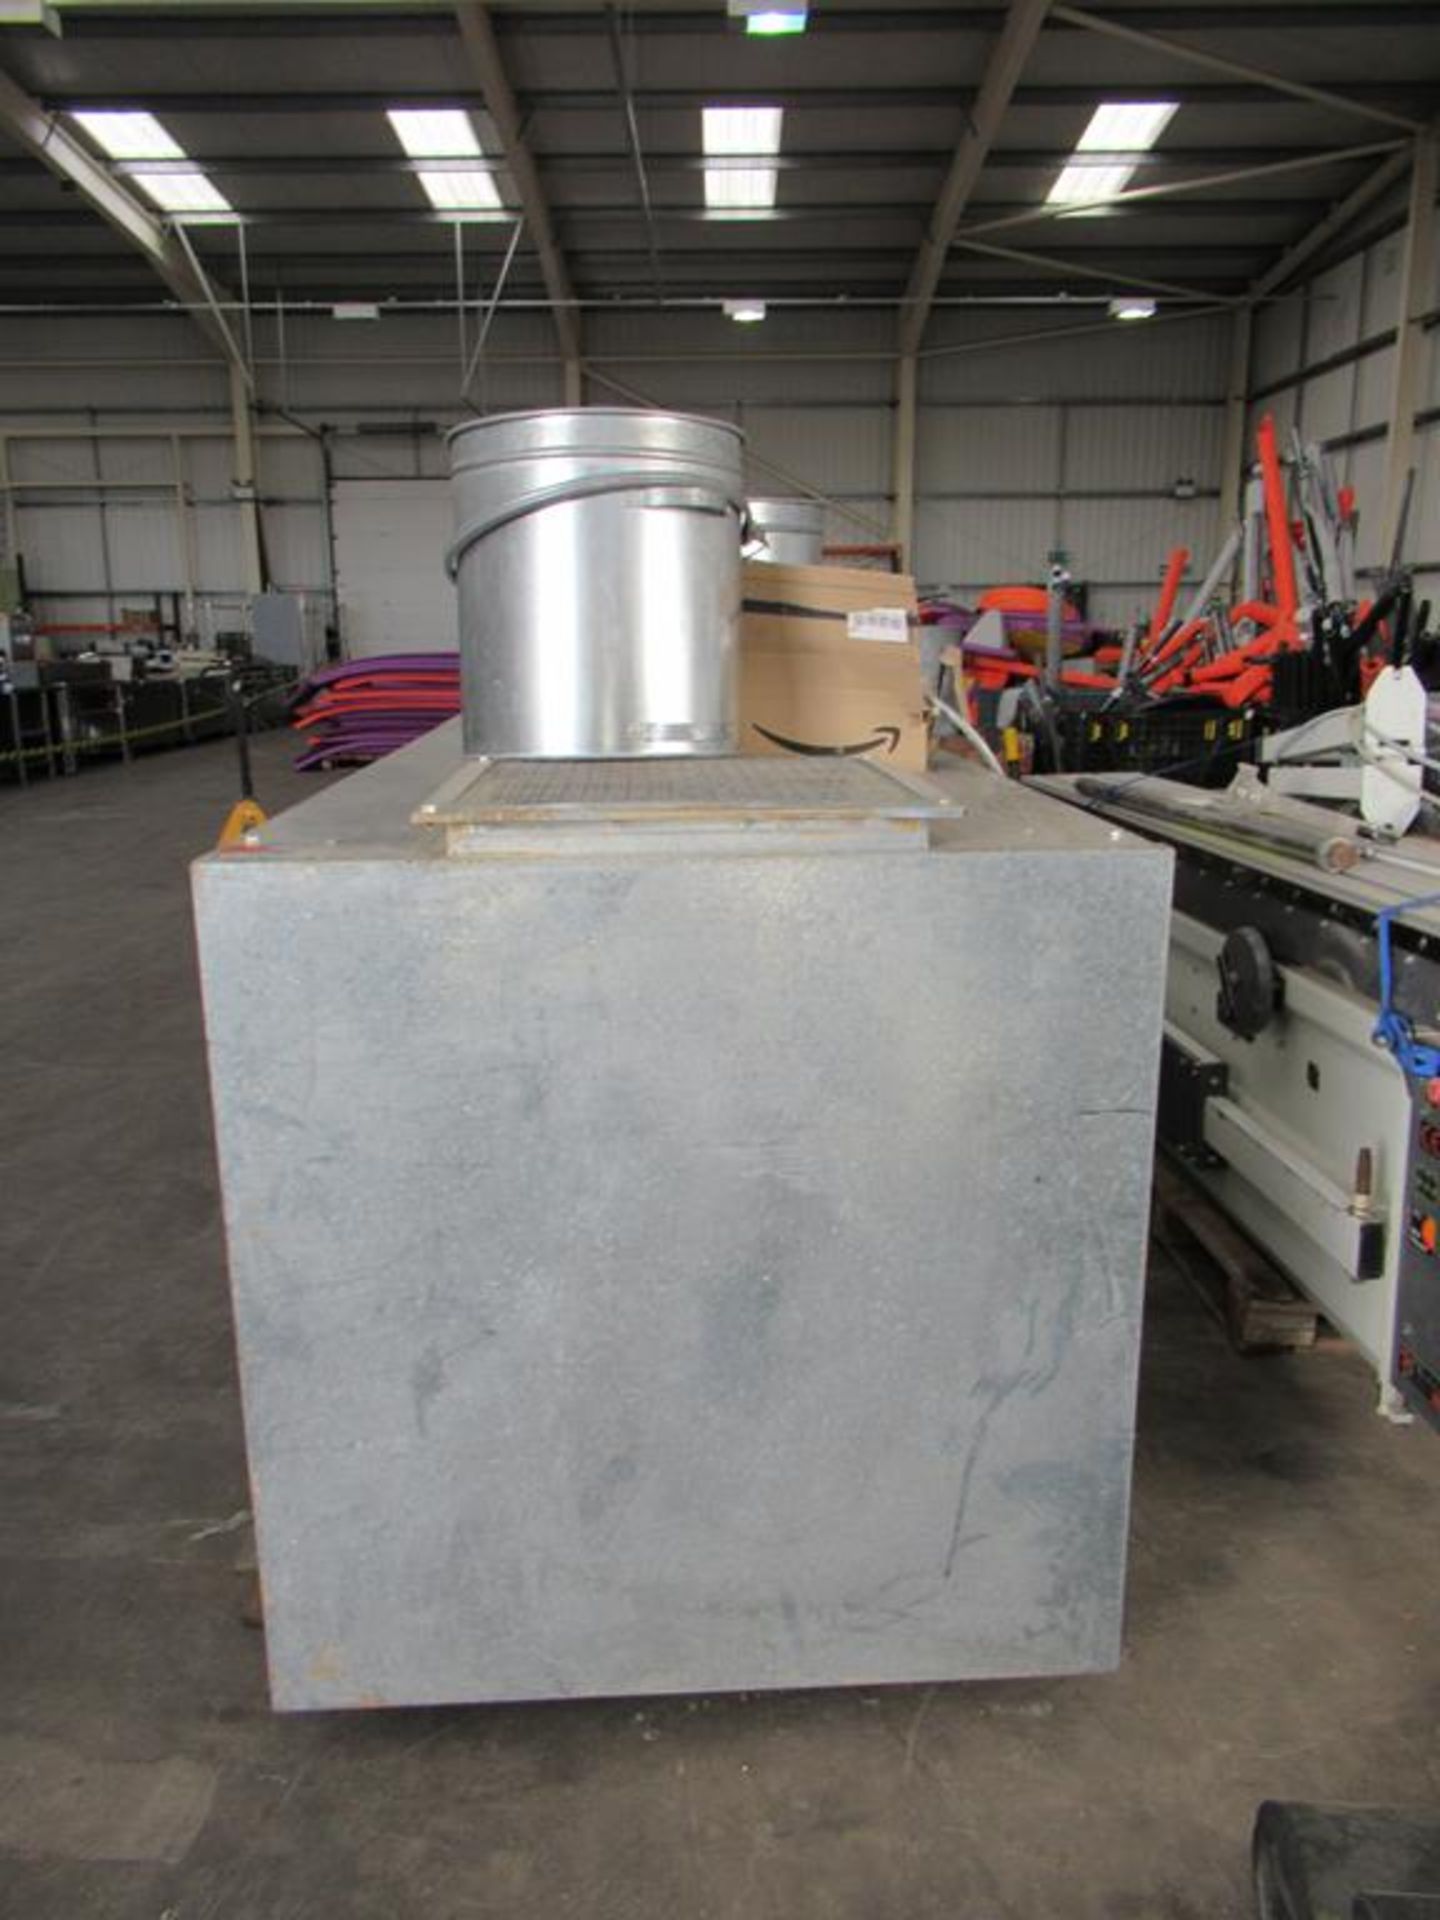 Twin Bin Cabinet Extractor with ATEX Explosion Panel for Fine Dust. - Image 4 of 6